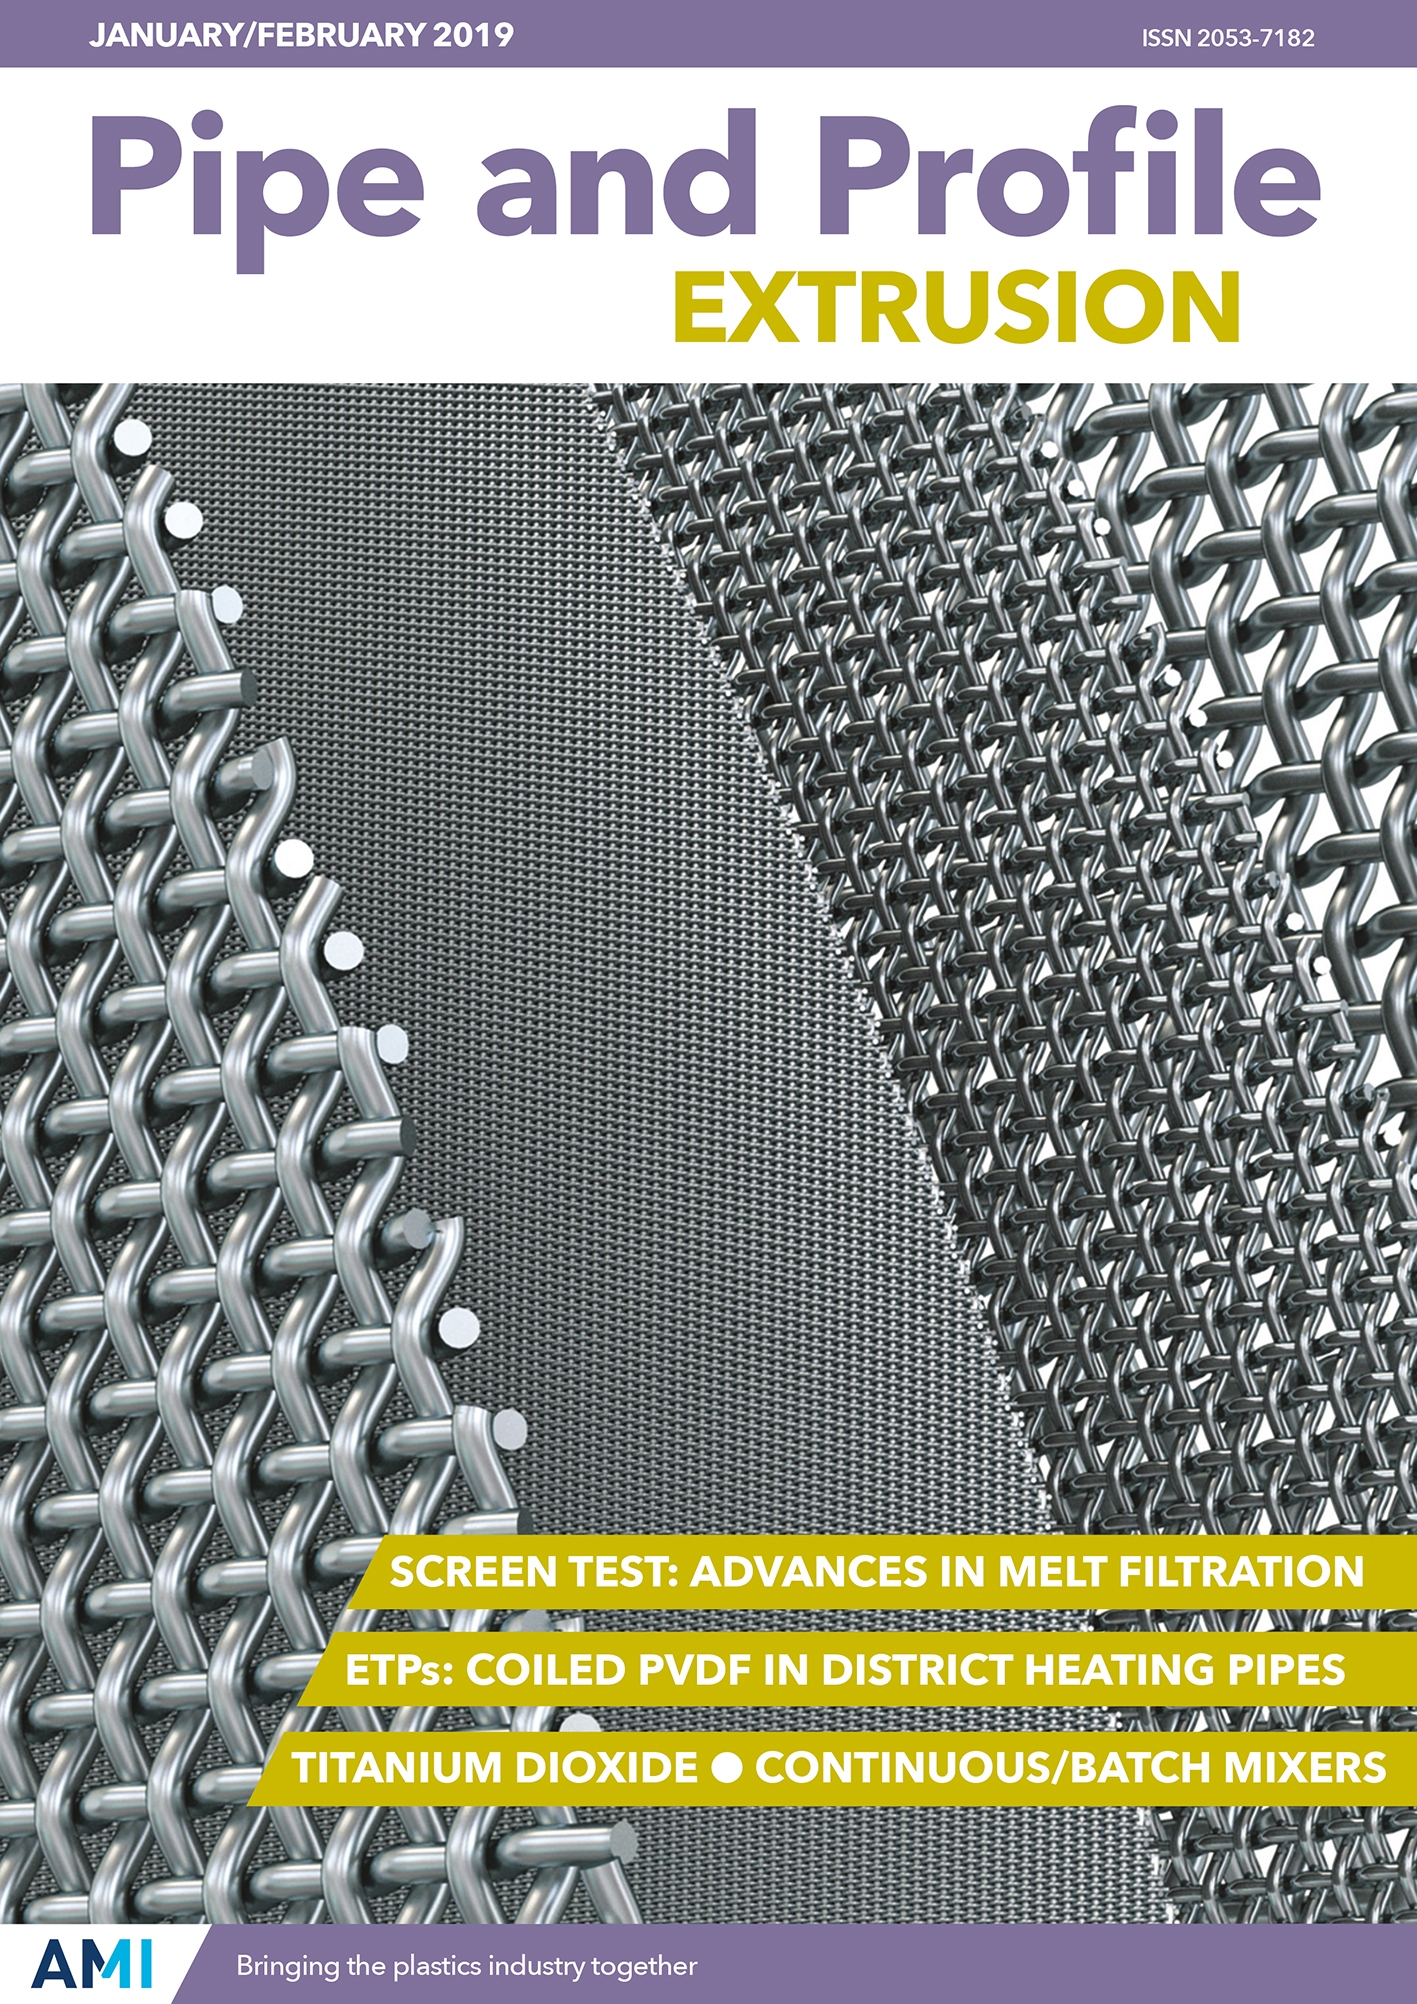 Pipe and Profile Extrusion January/February 2019